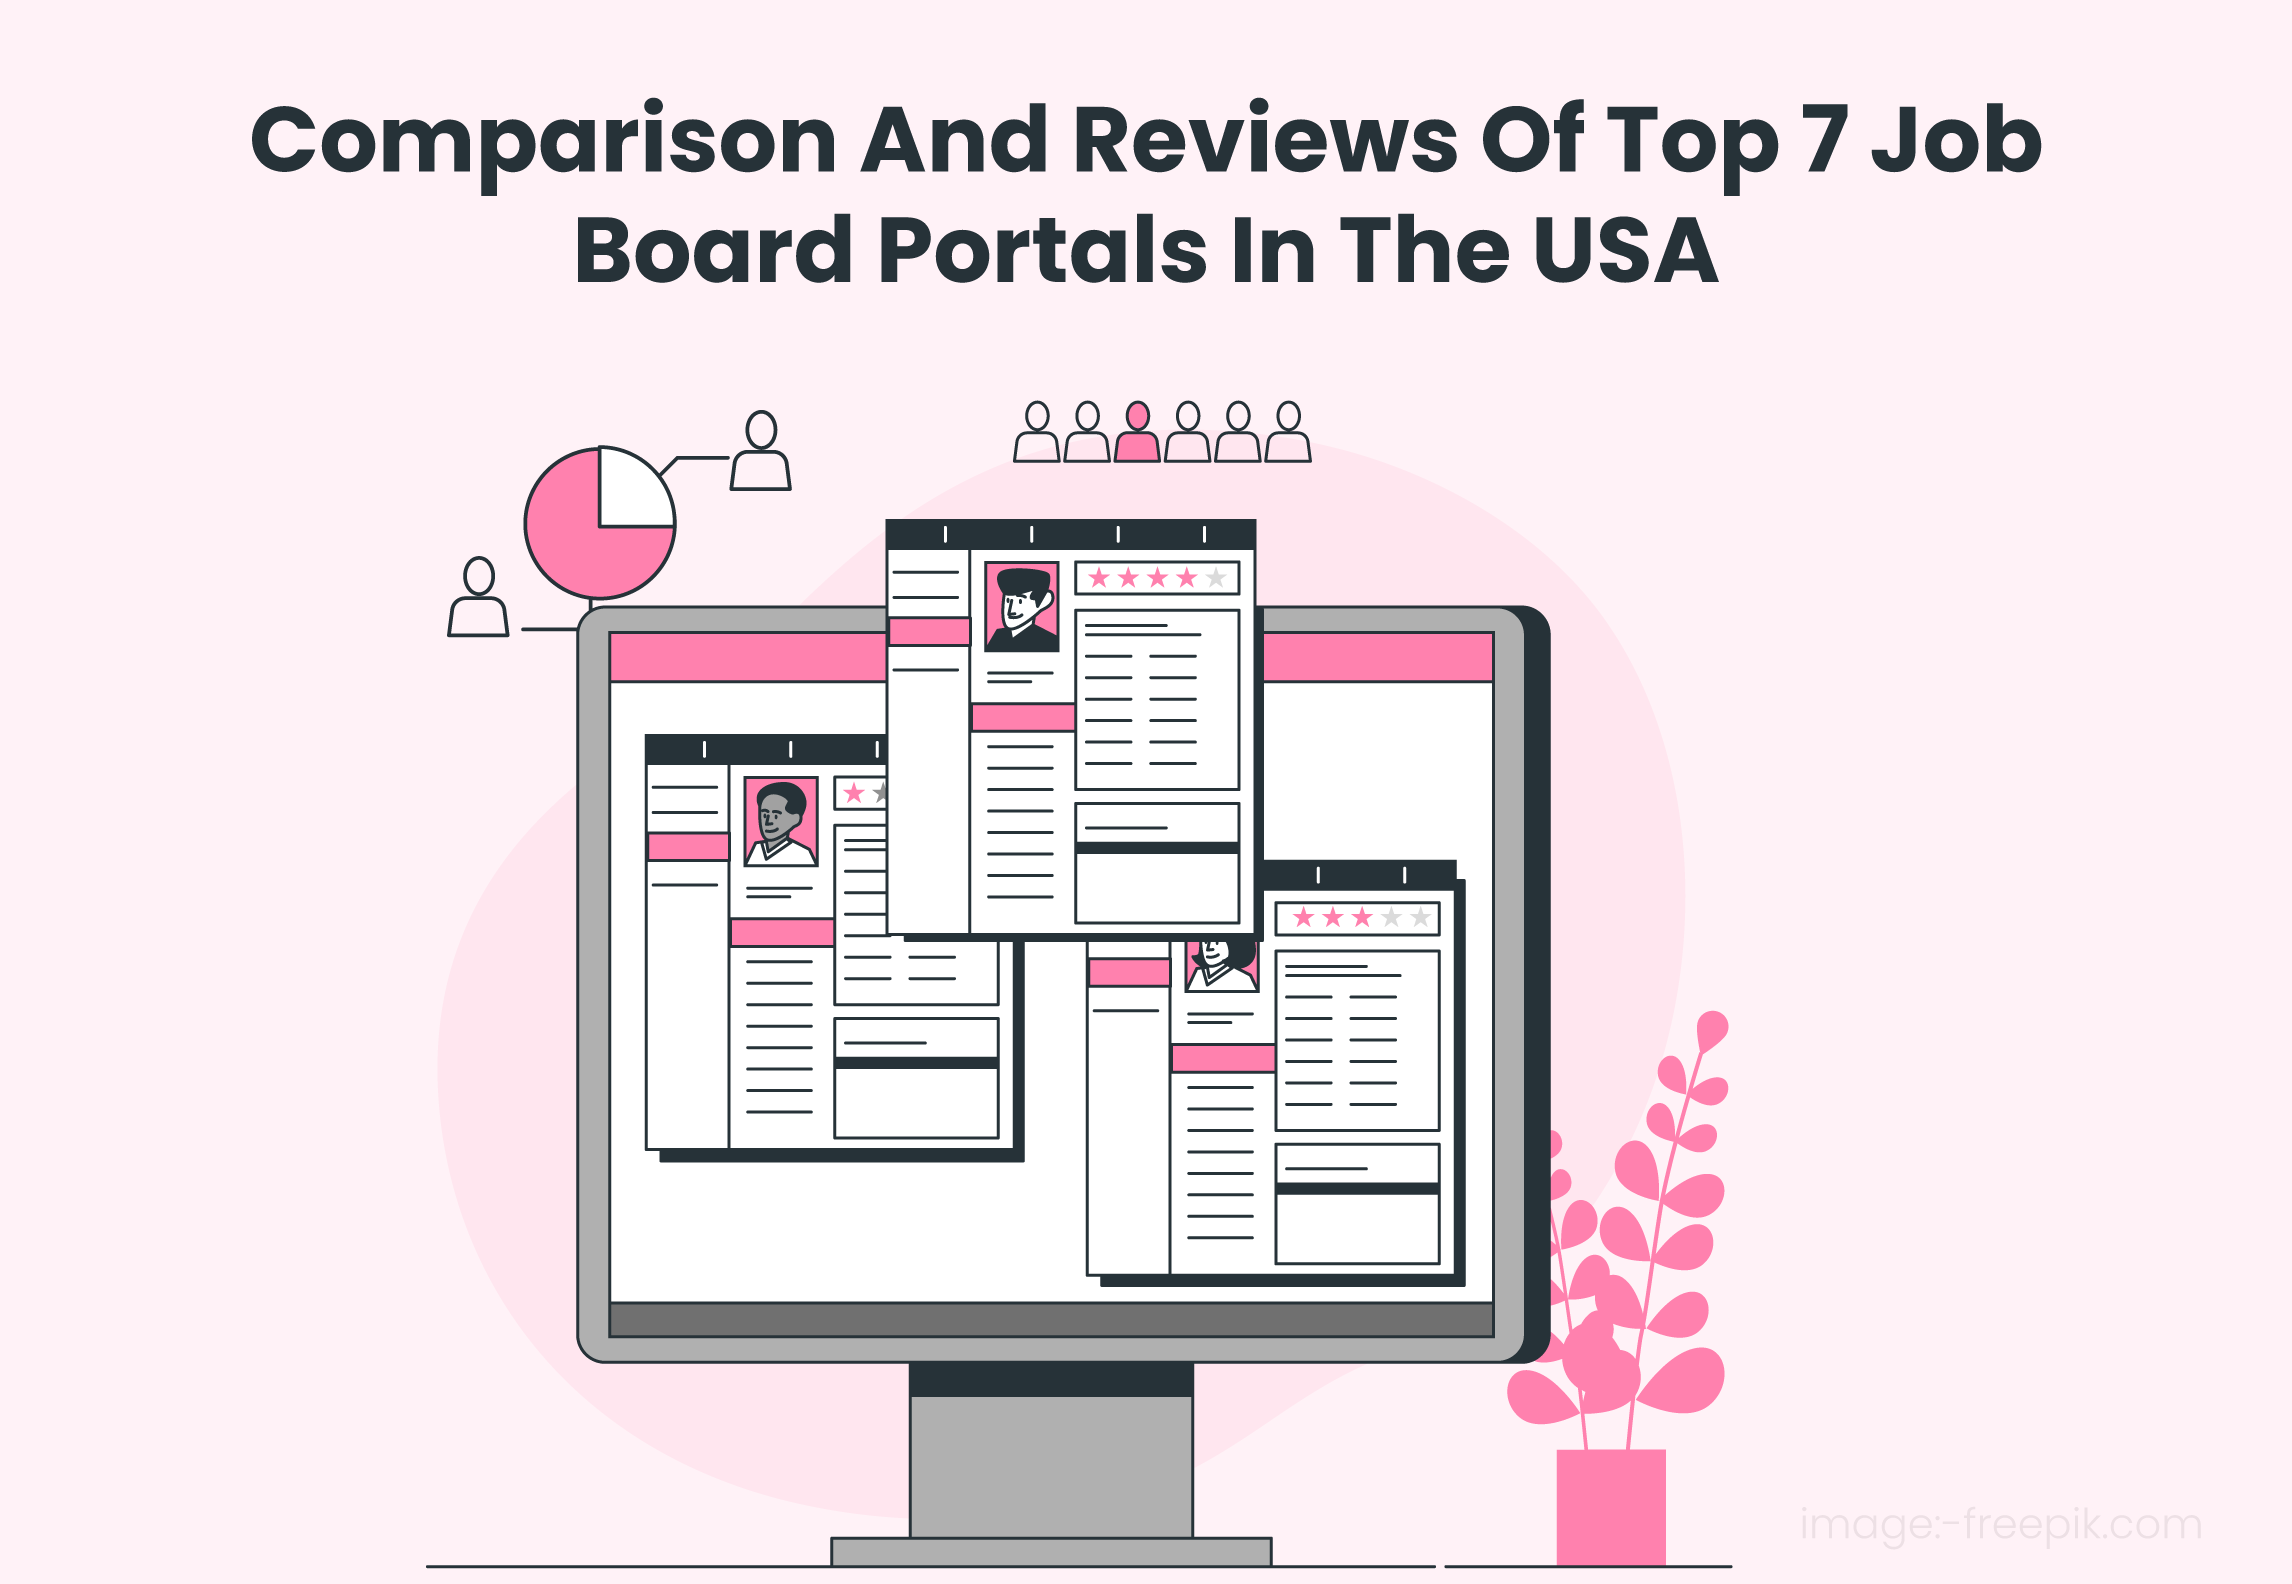 Top 7 Job Board Portals in the USA: Compared and Reviewed